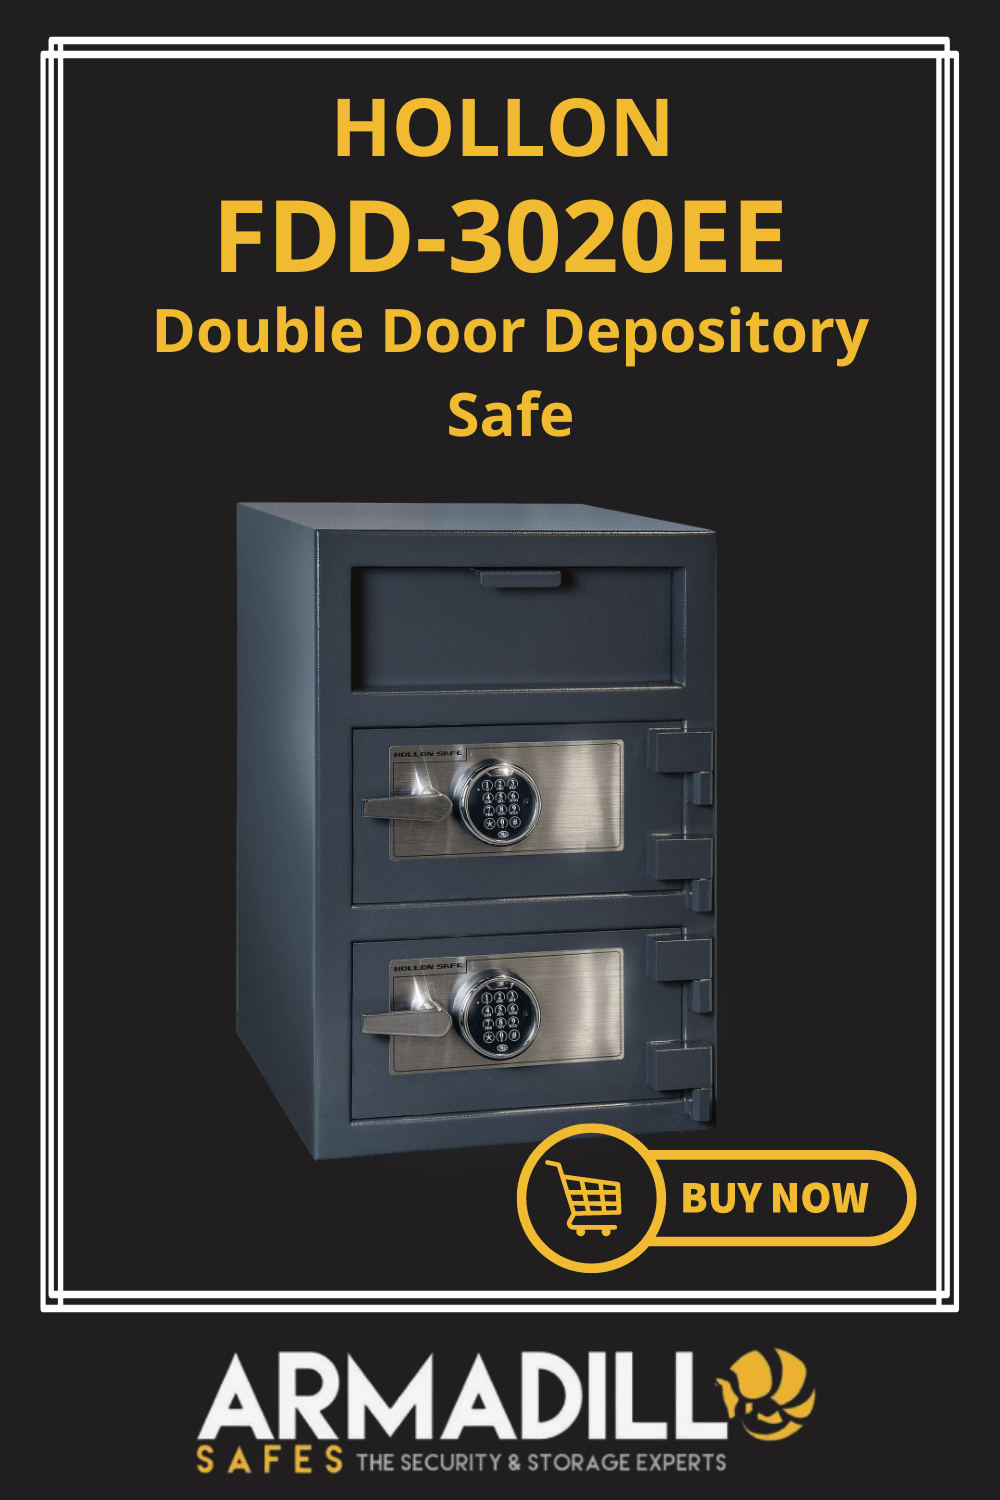 Hollon FDD-3020EE Double Door Depository Safe Armadillo Safe and Vault